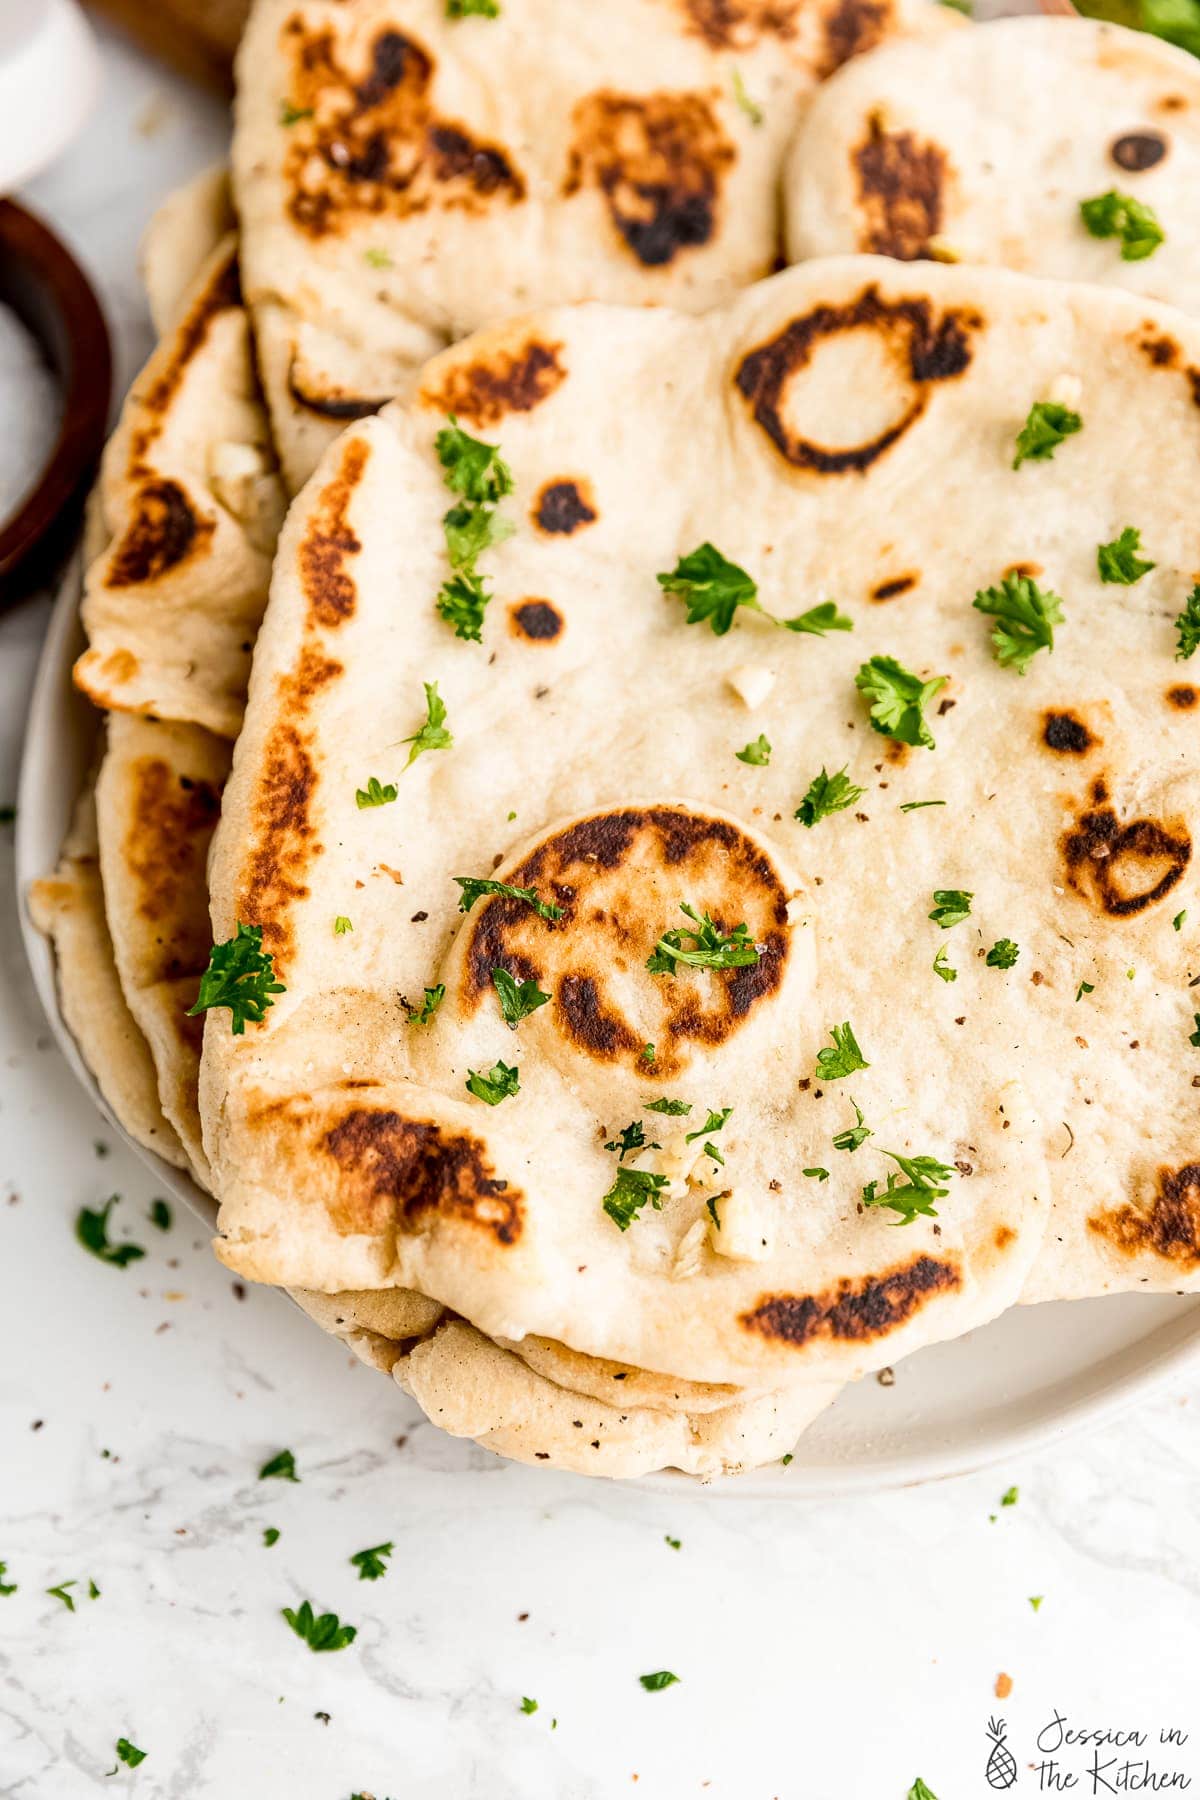 Stack of naan loaves on a plate.